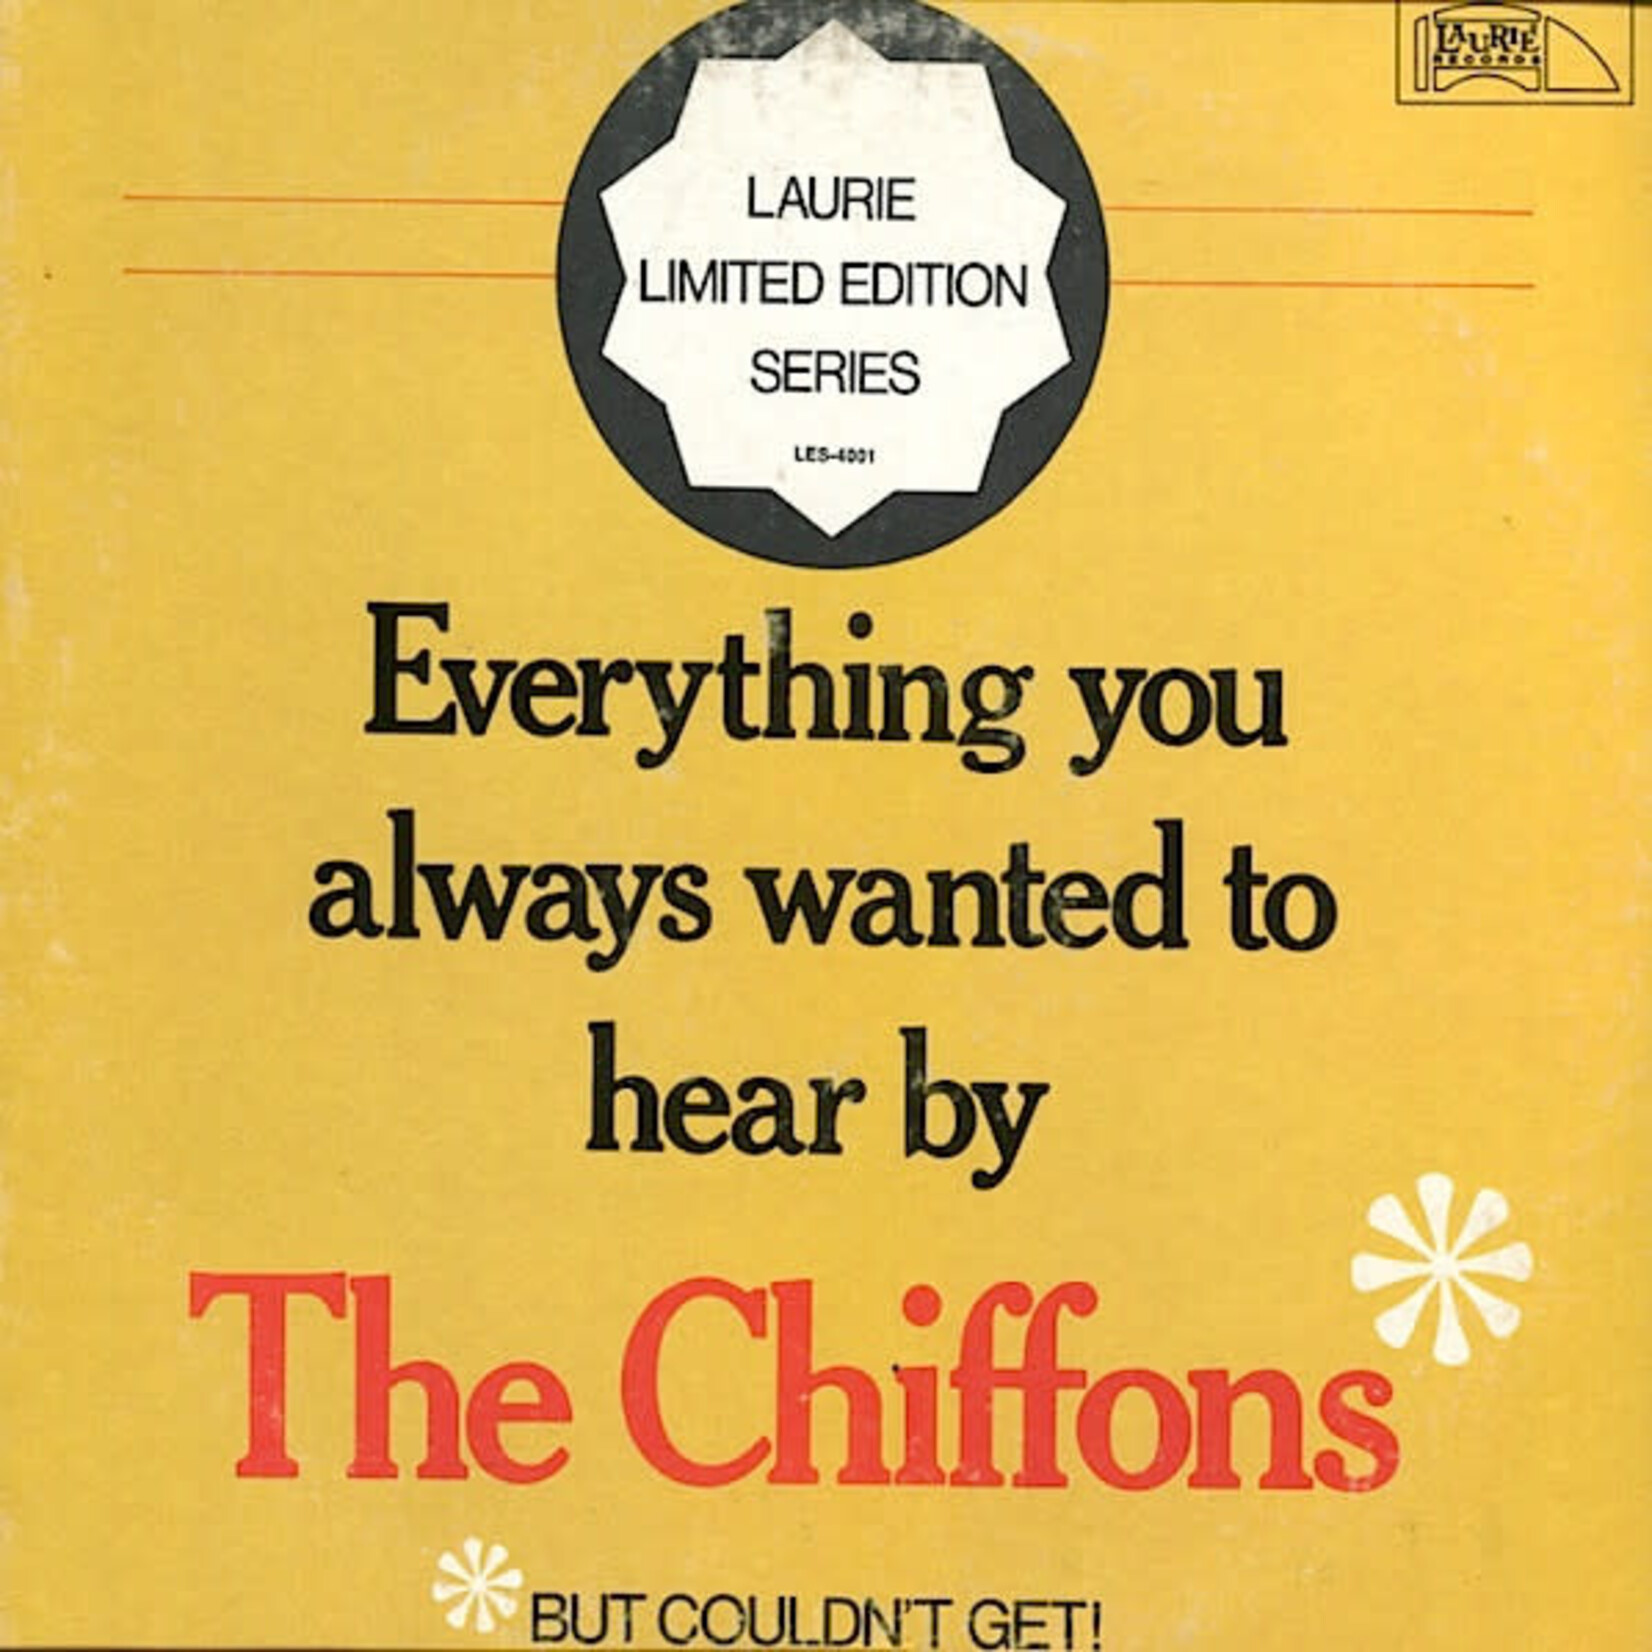 [Vintage] Chiffons - Everything You Always Wanted to Hear by the Chiffons